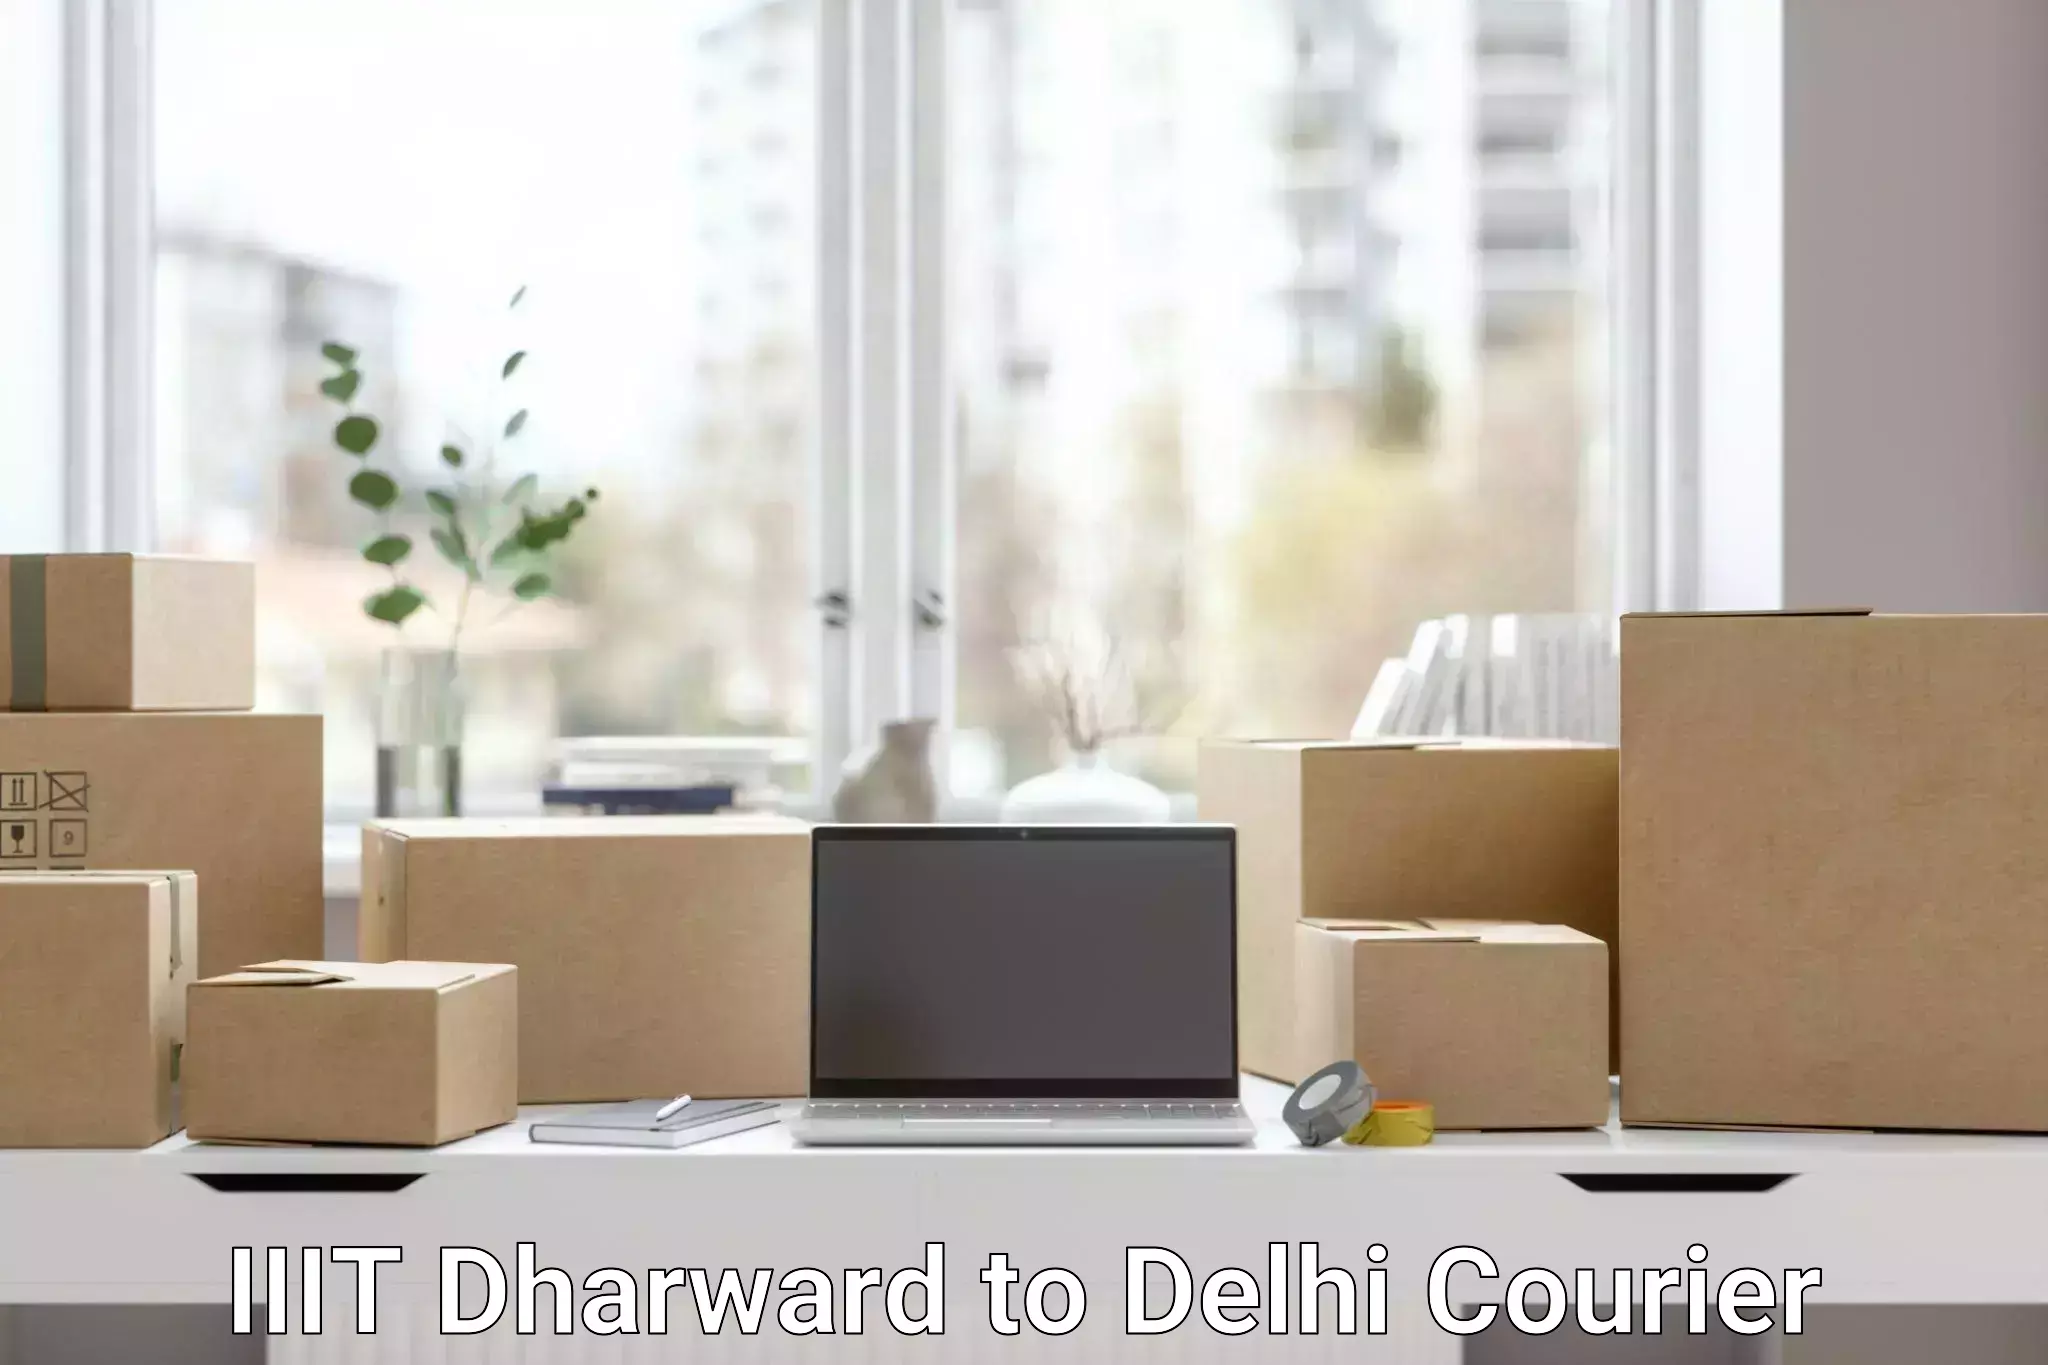 Optimized shipping routes IIIT Dharward to Lodhi Road